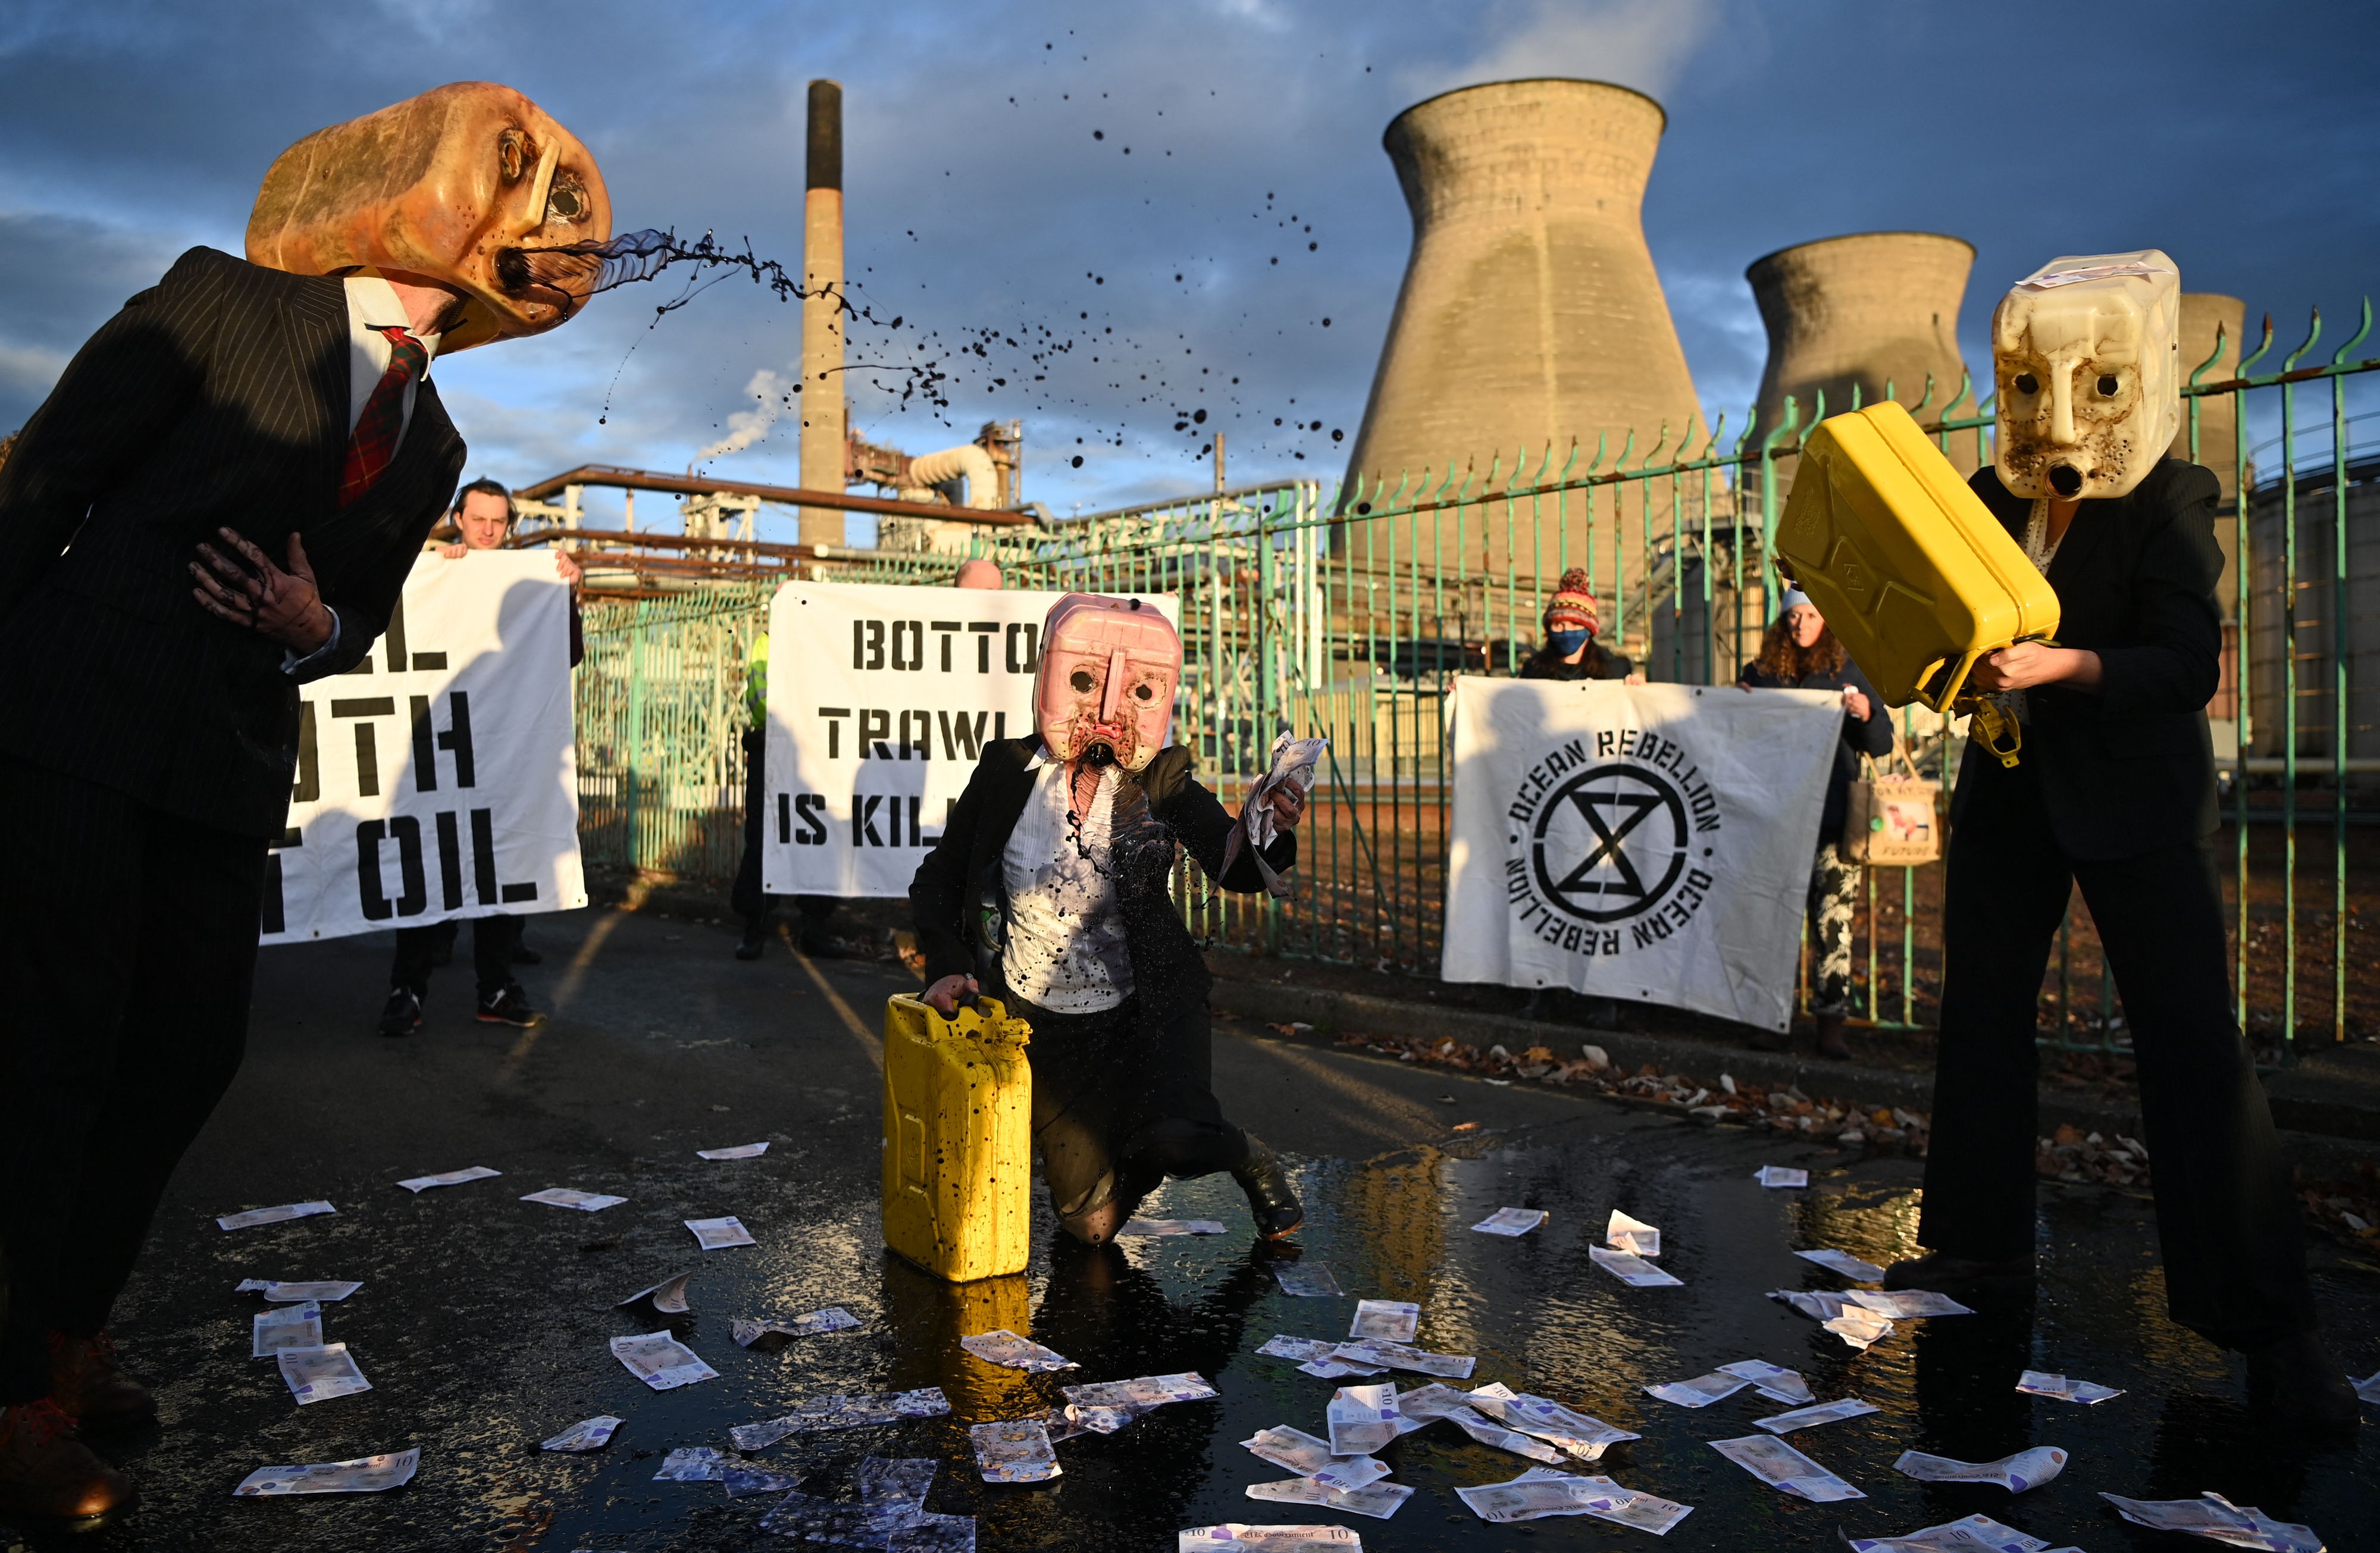 Oil Heads: Climate activists from the Ocean Rebellion group, demonstrate outside the INEOS intergrated refinery and petrochemicals centre plant in Grangemouth.